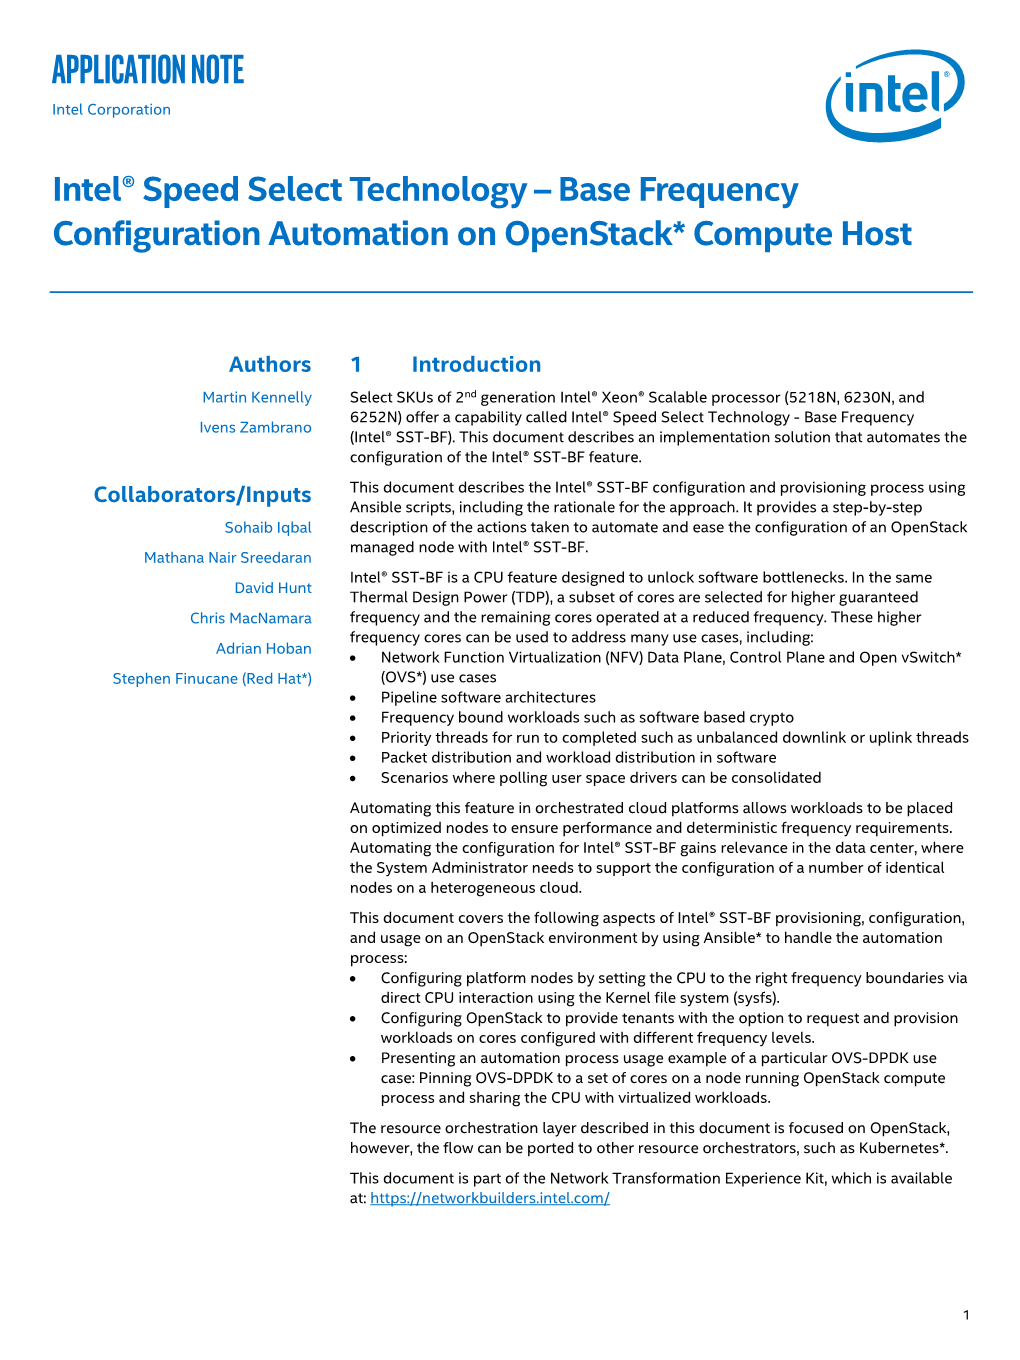 Intel® SST-BF Configuration Automation on Openstack* Compute Host